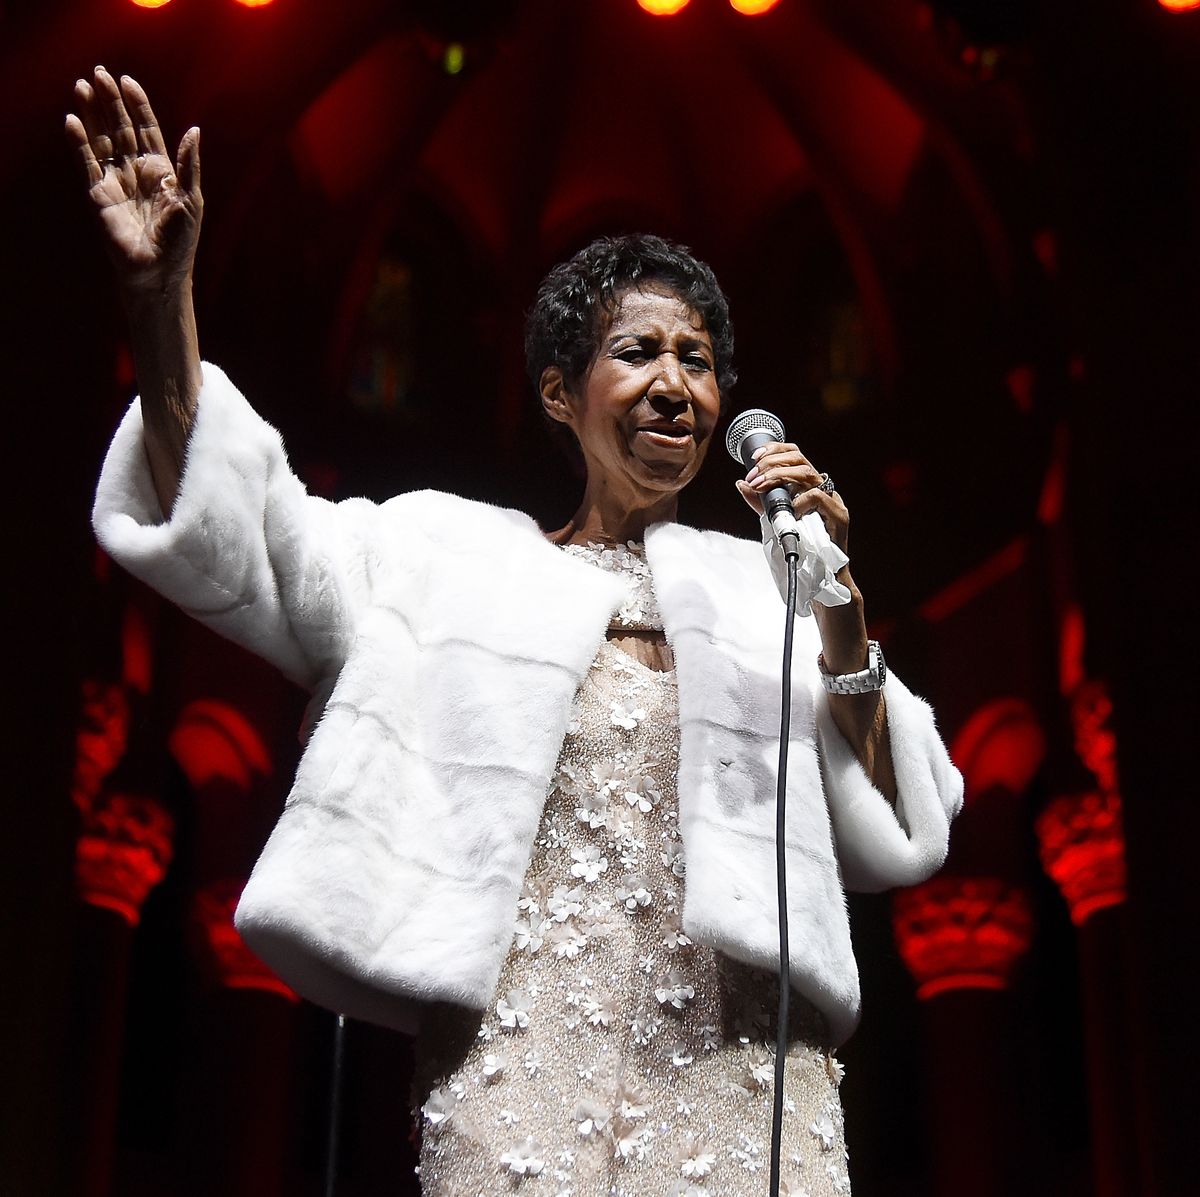 https://hips.hearstapps.com/hmg-prod/images/aretha-franklin-performs-on-stage-at-the-elton-john-aids-news-photo-871780286-1534183157.jpg?crop=0.716xw:1.00xh;0.143xw,0&resize=1200:*